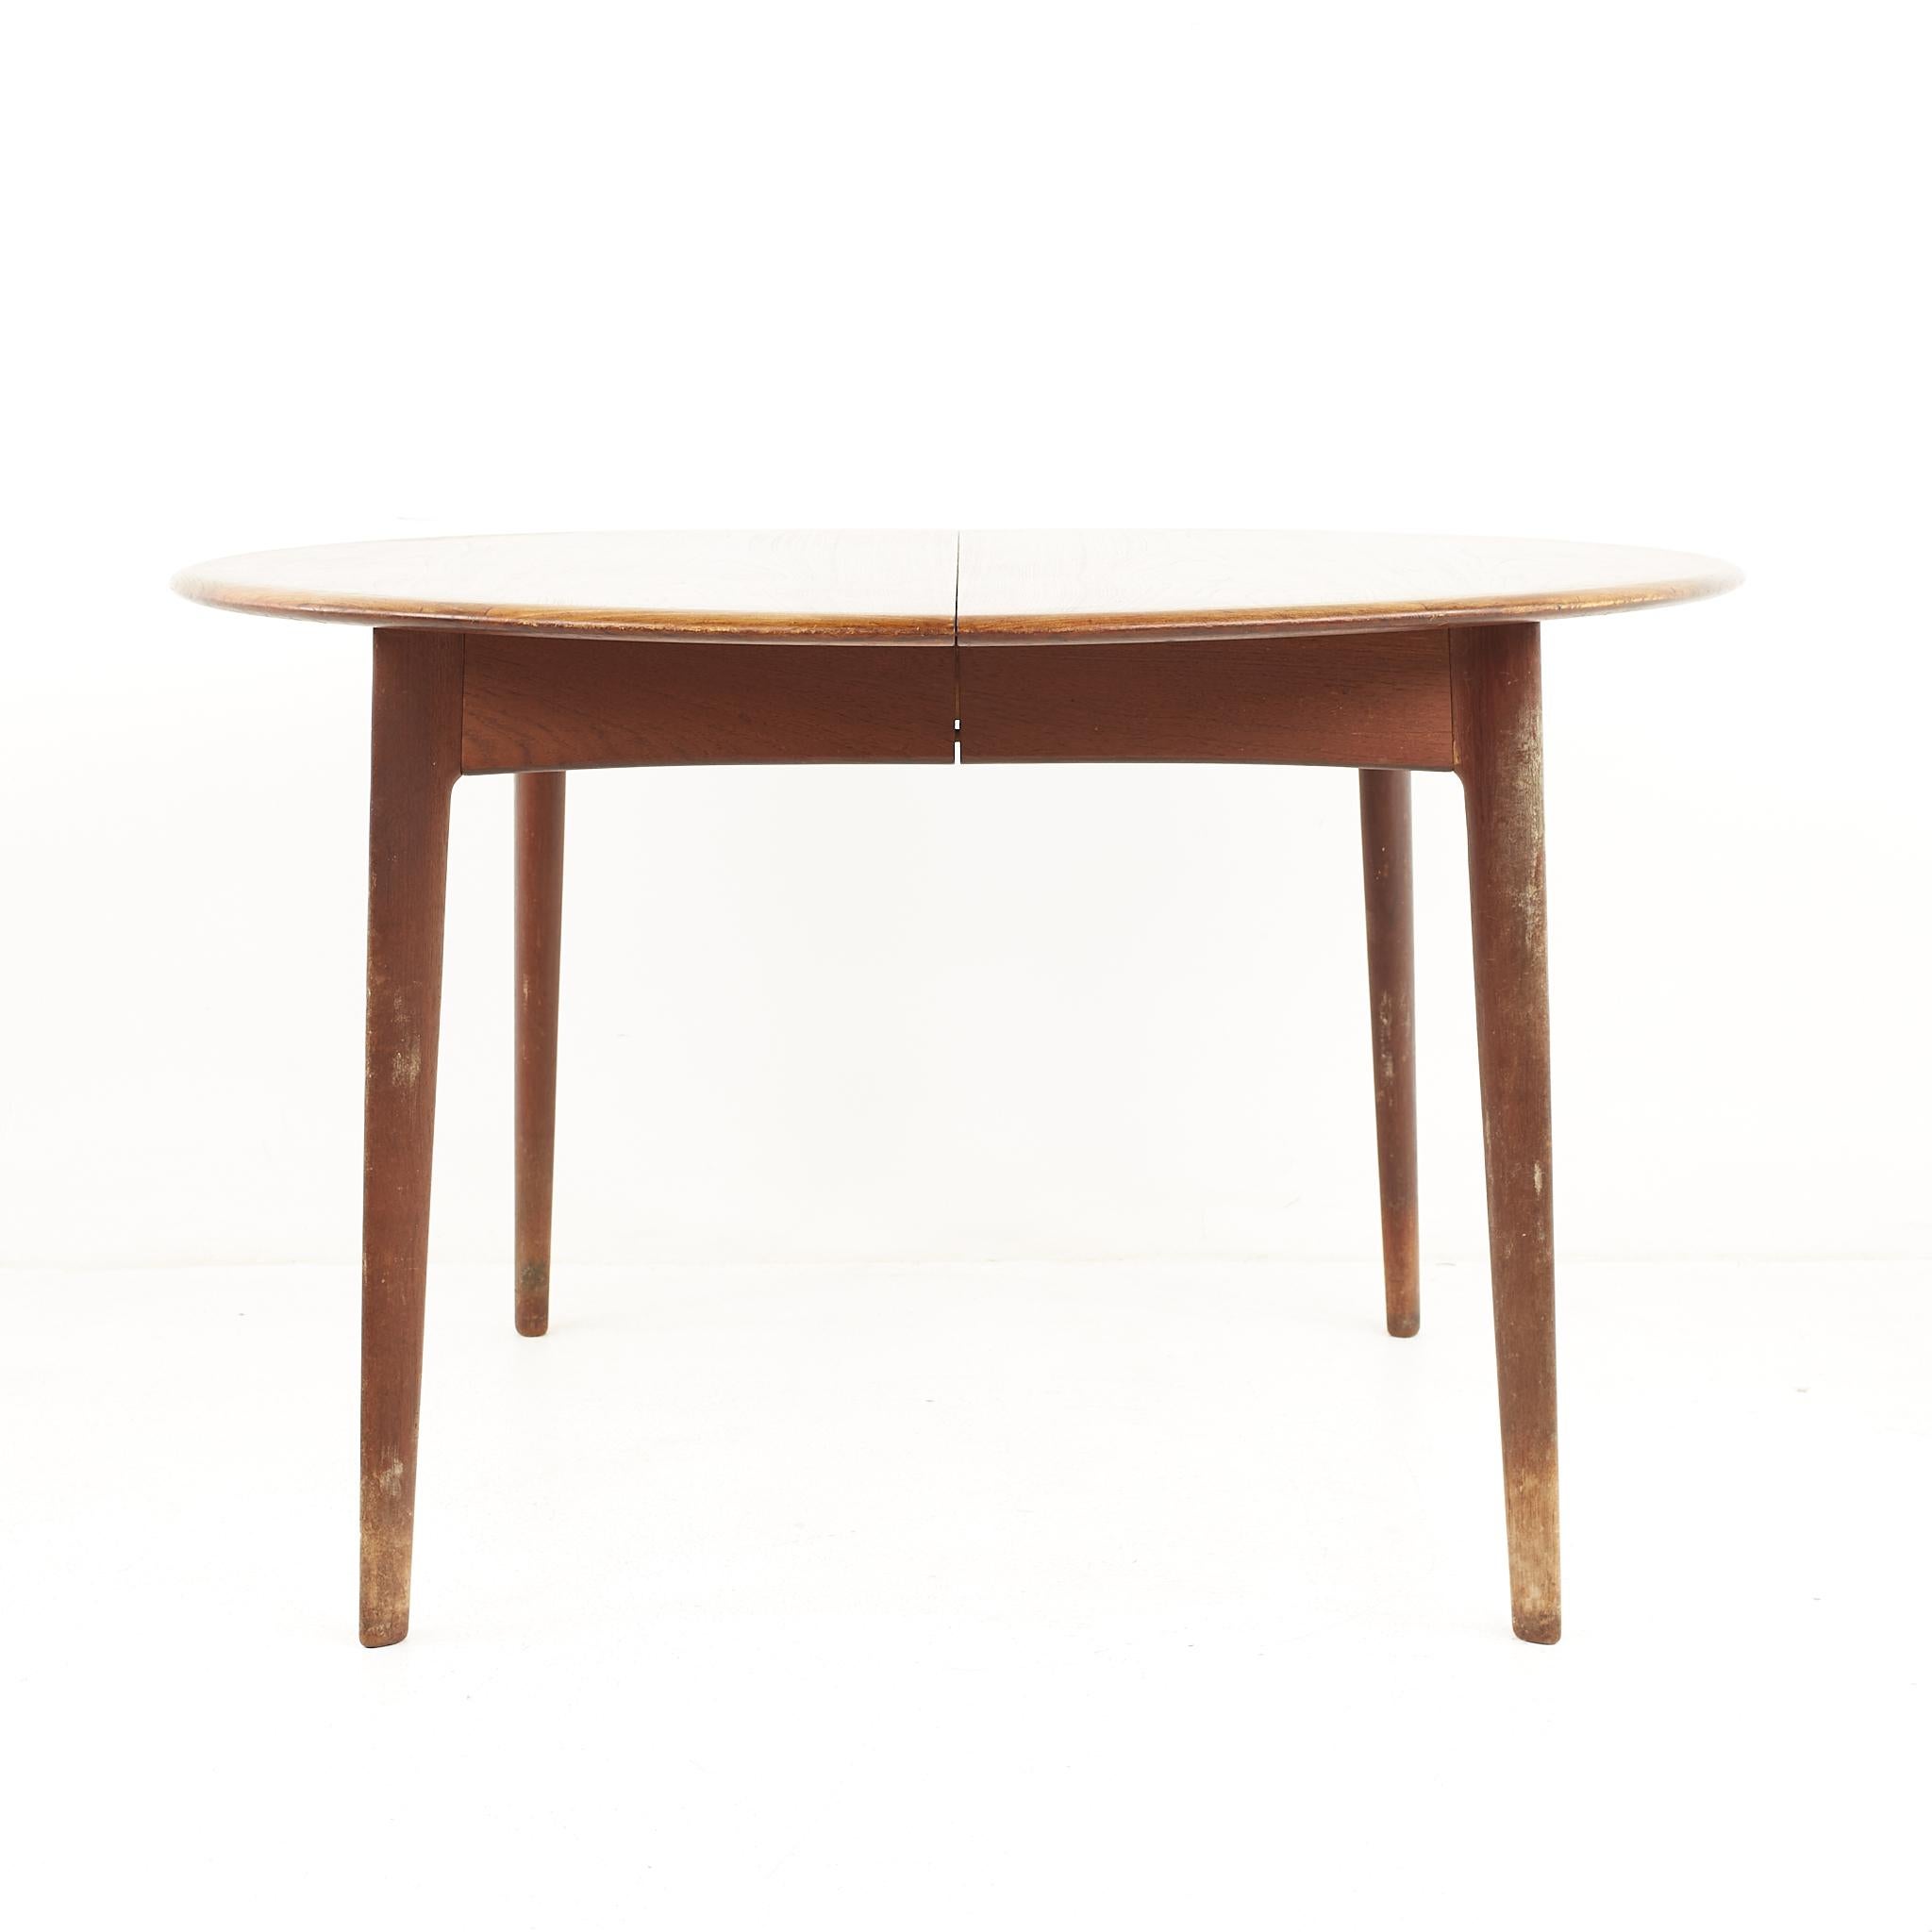 Uldum Mobelfabrik style mid century danish teak round dining table

The table measures: 48 wide x 48 deep x 28.5 high, with a chair clearance of 27.5 inches; each leaf is 24 inches wide, making a maximum table width of 96 inches when both leaves